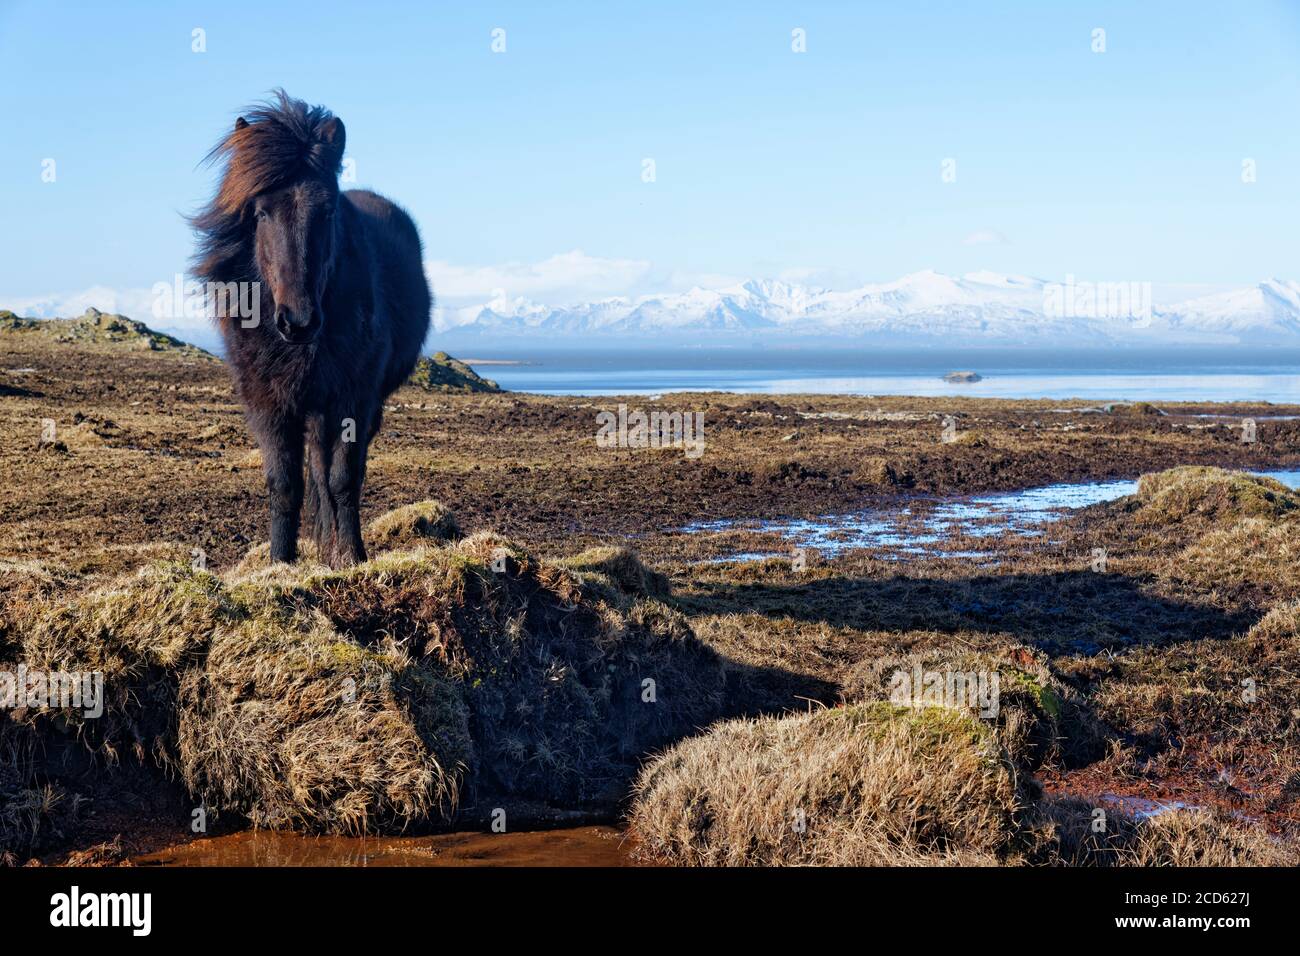 Wild horse standing in natural setting, Vestrahom, Iceland Stock Photo